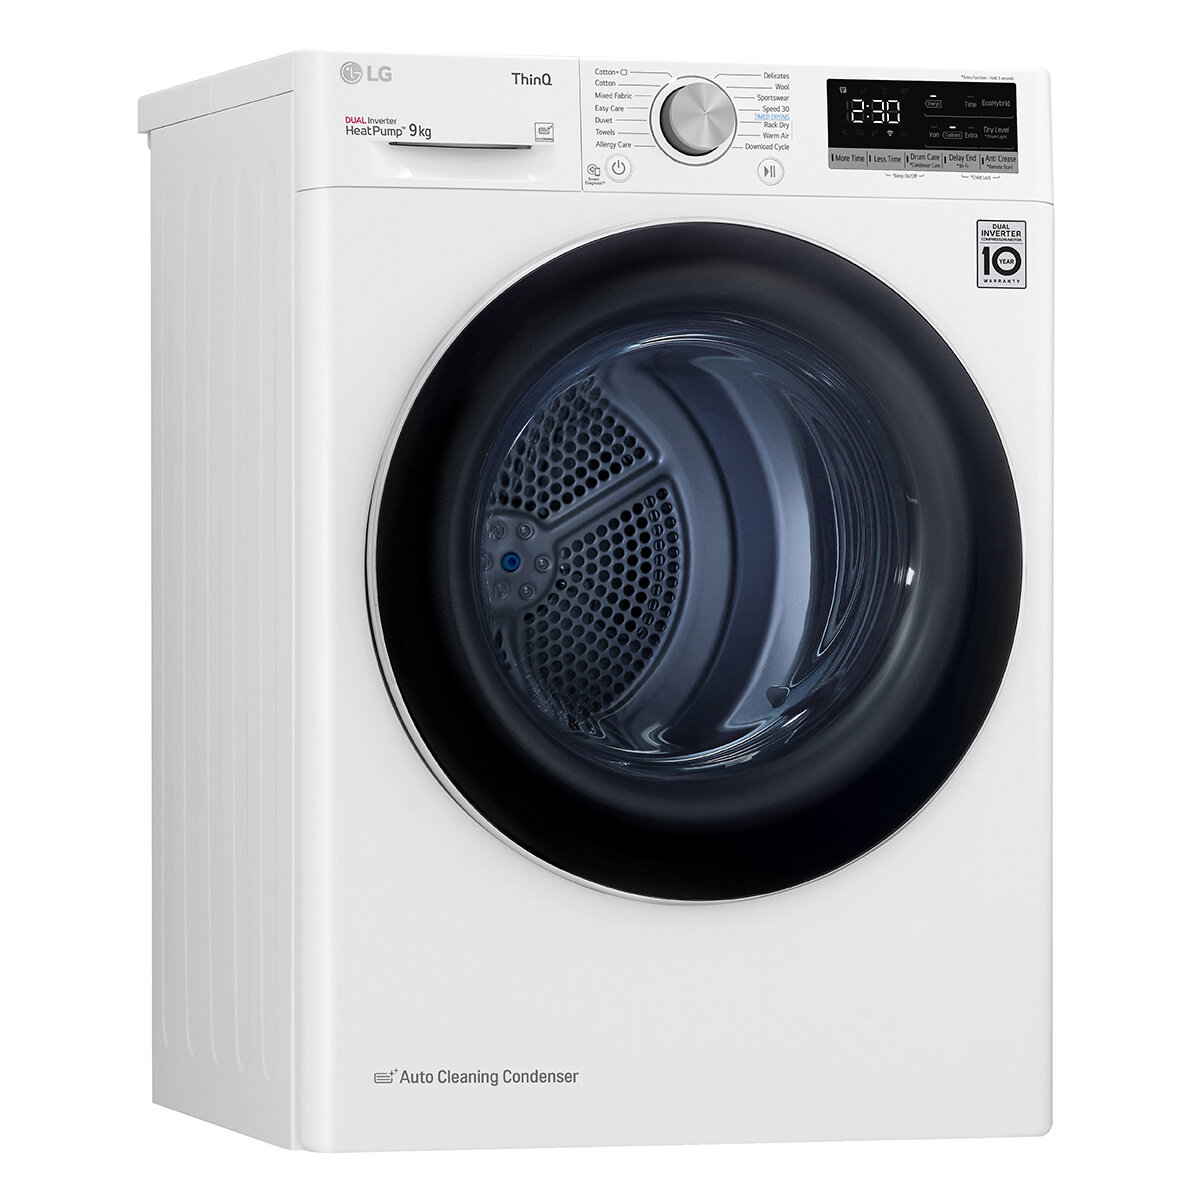 Buy LG FDV709W, 9kg Heat Pump Tumble Dryer, A++ Rated in White at Costco.co.uk